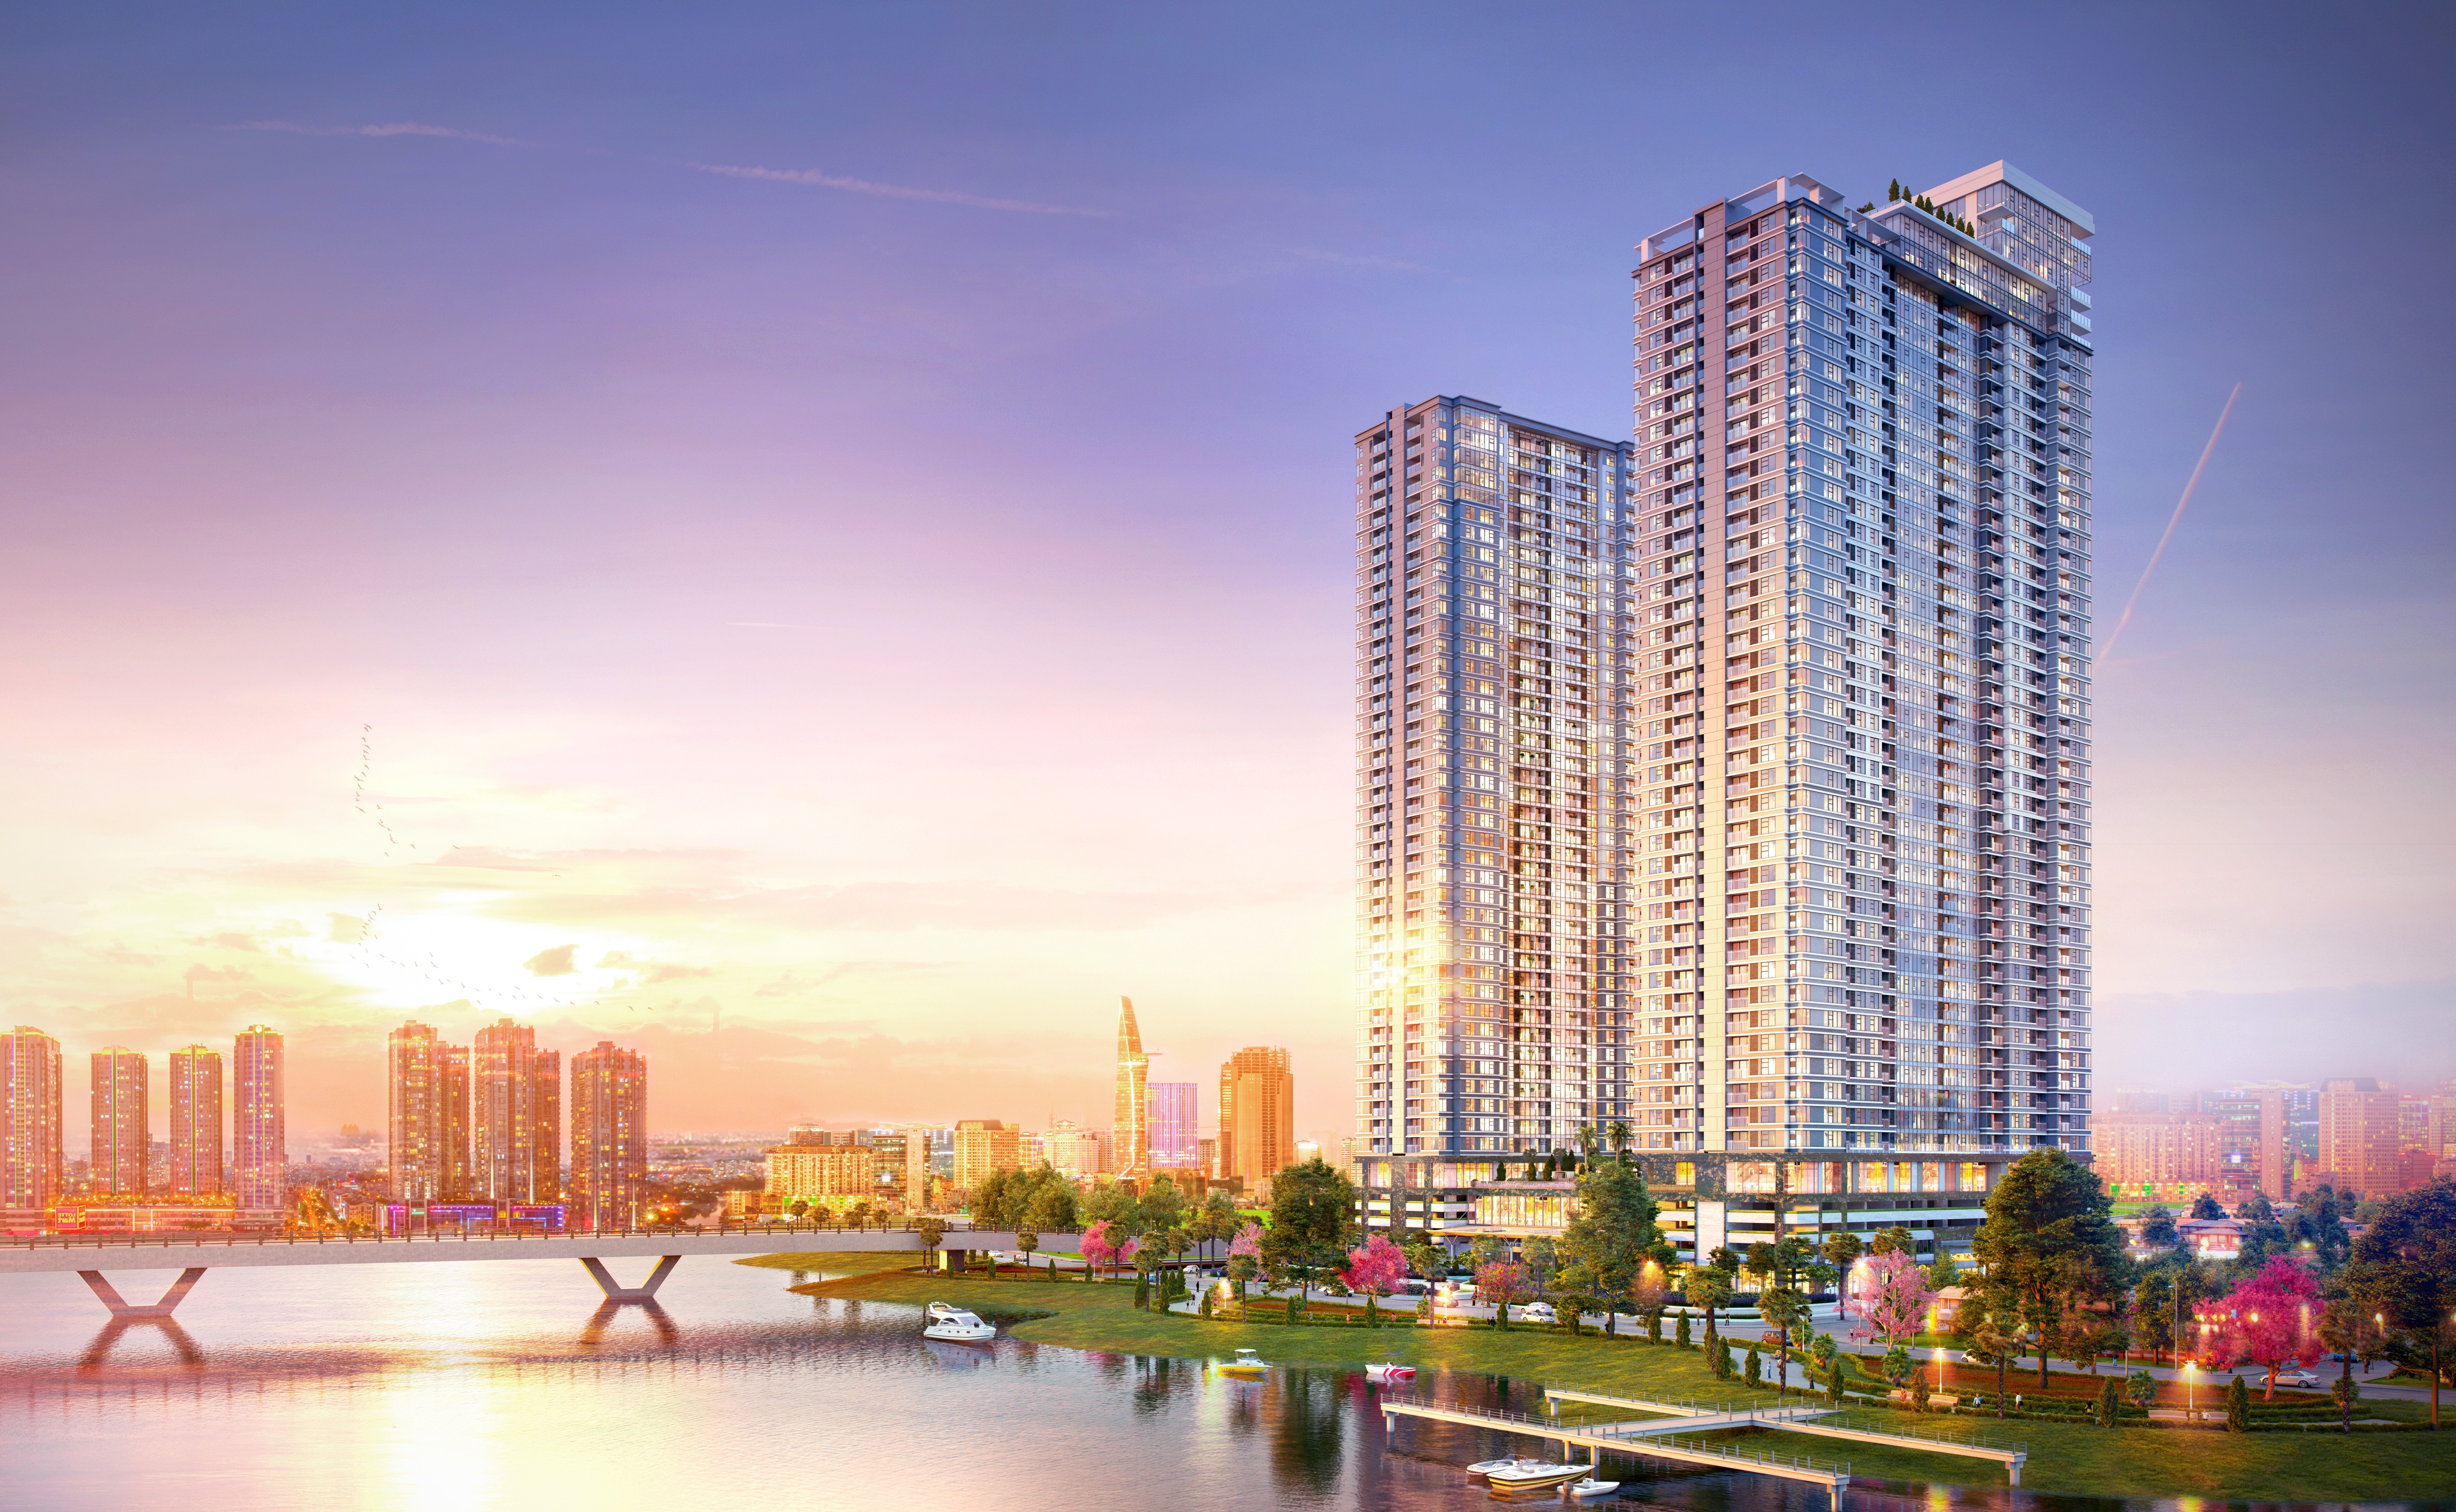 Sunwah Pearl promises a luxury lifestyle and fine riverside views in Ho Chi Minh City, Vietnam